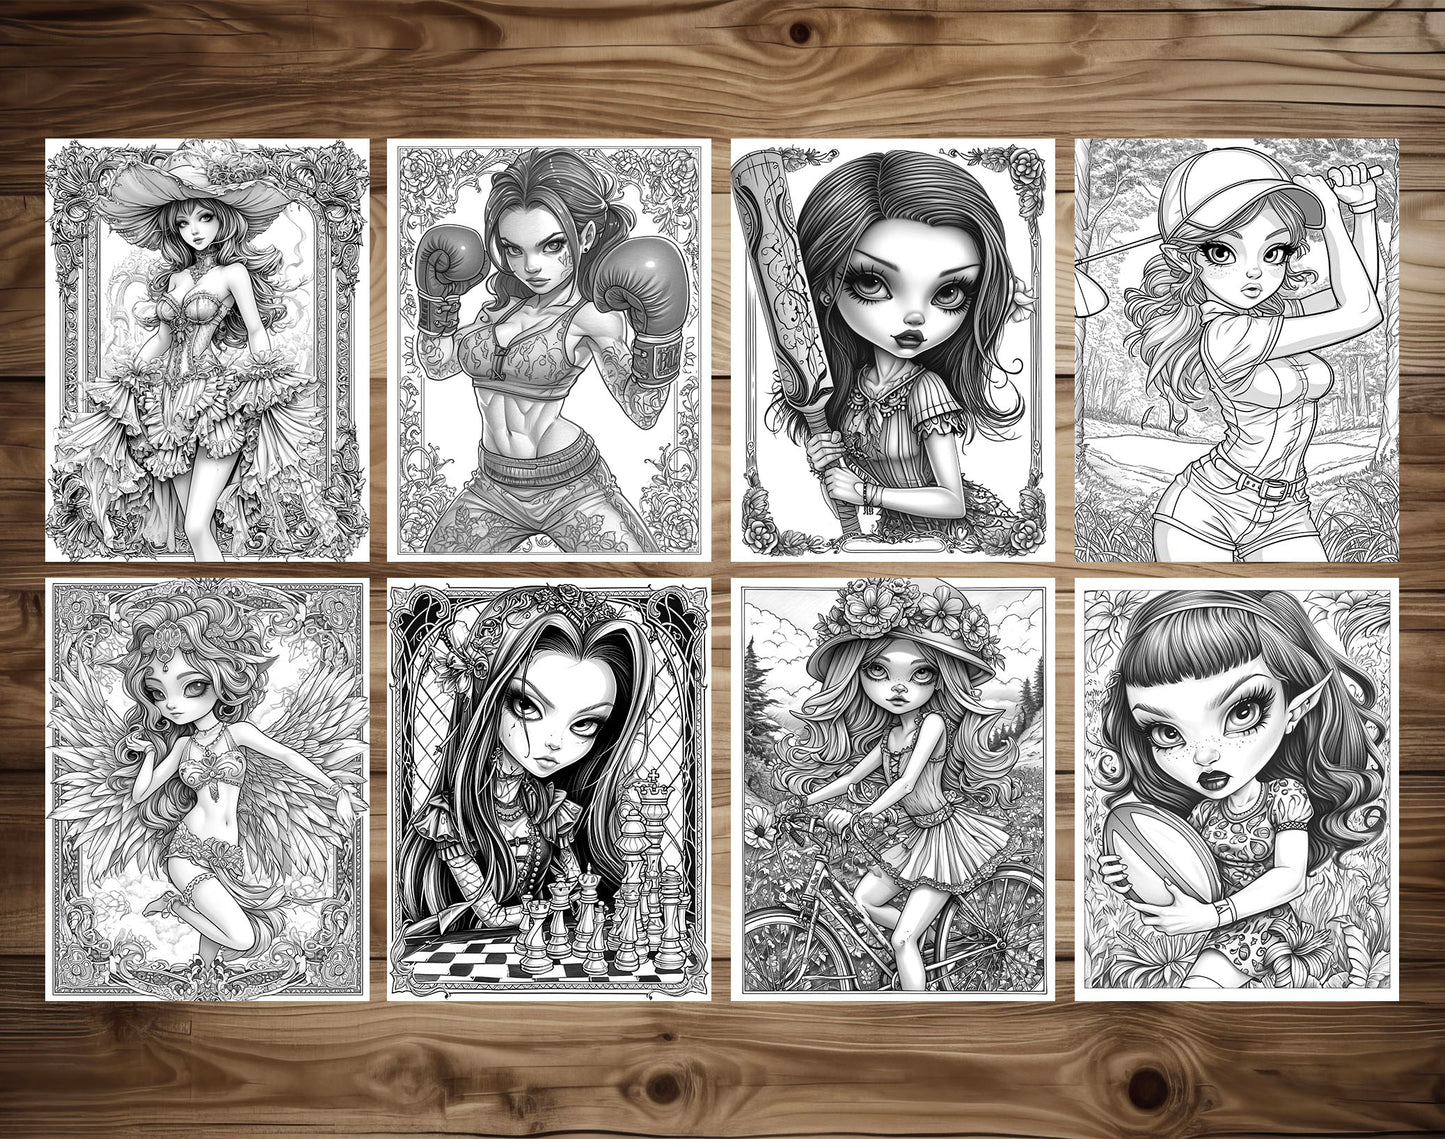 50 Pretty Girl Grayscale Coloring Pages - Instant Download - Printable Dark/Light